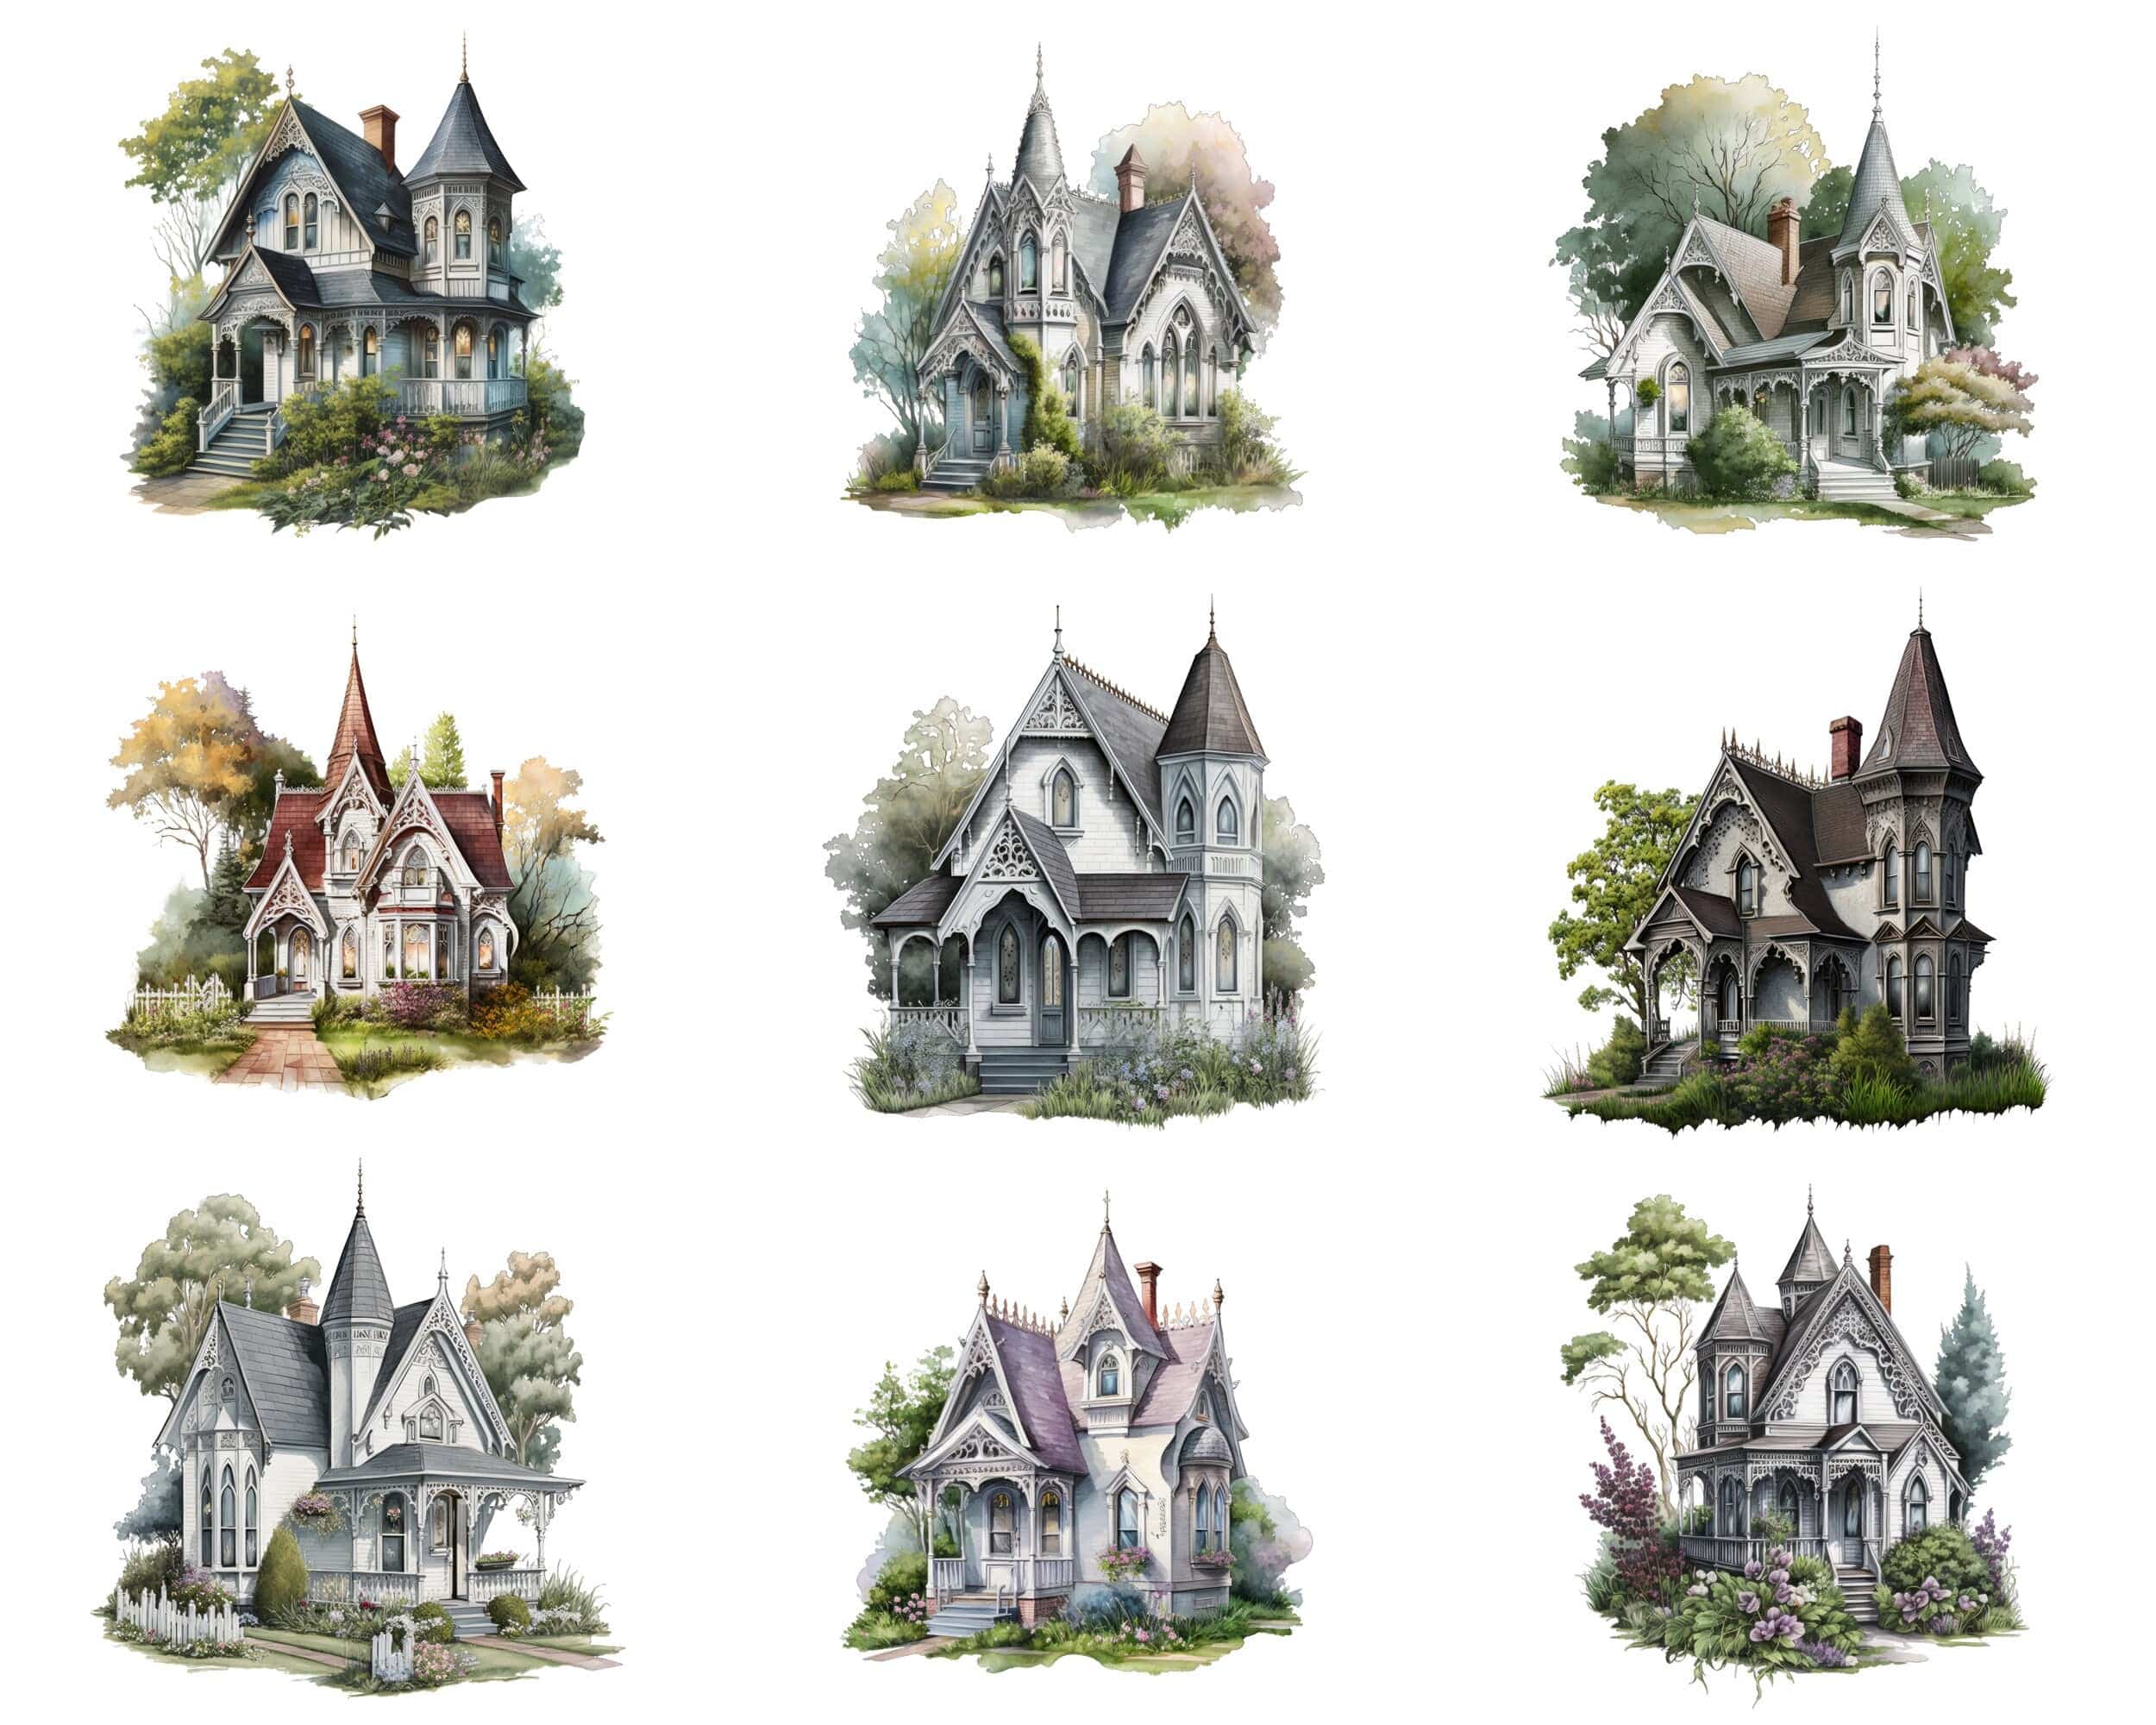 Bundle of 69 Gothic Houses and Cottages - Transparent Digital Images - Vintage-Inspired, Darkly Romantic PNG Clipart Collection for Crafting Digital Download Sumobundle